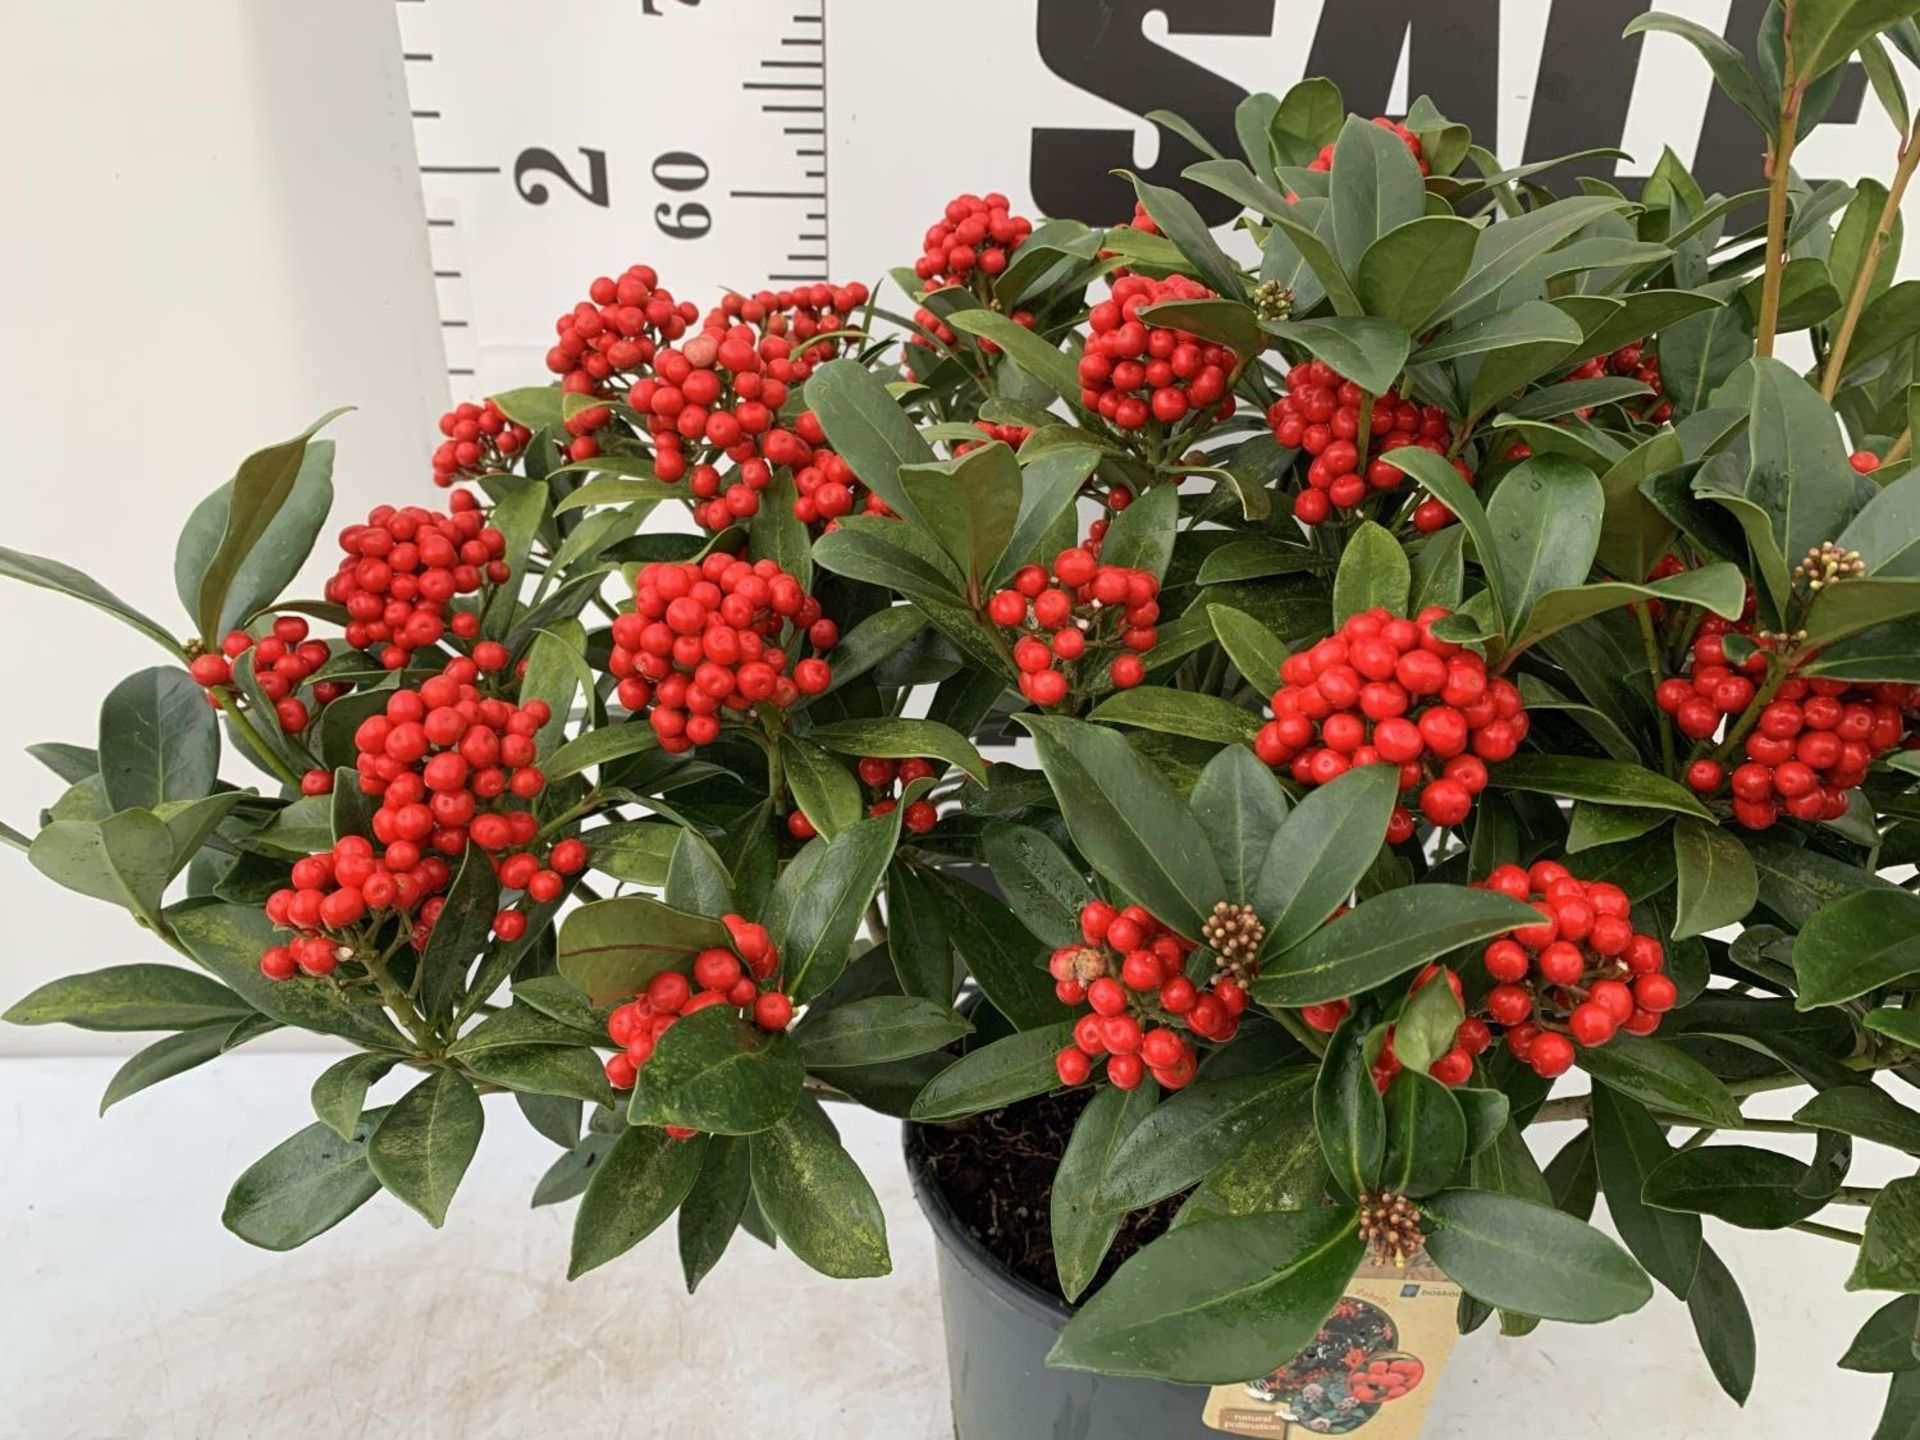 ONE LARGE SKIMMIA JAPONICA 'PABELLA' PLANT IN 5 LTR POT APPROX 75CM IN HEIGHT PLUS VAT - Image 3 of 7